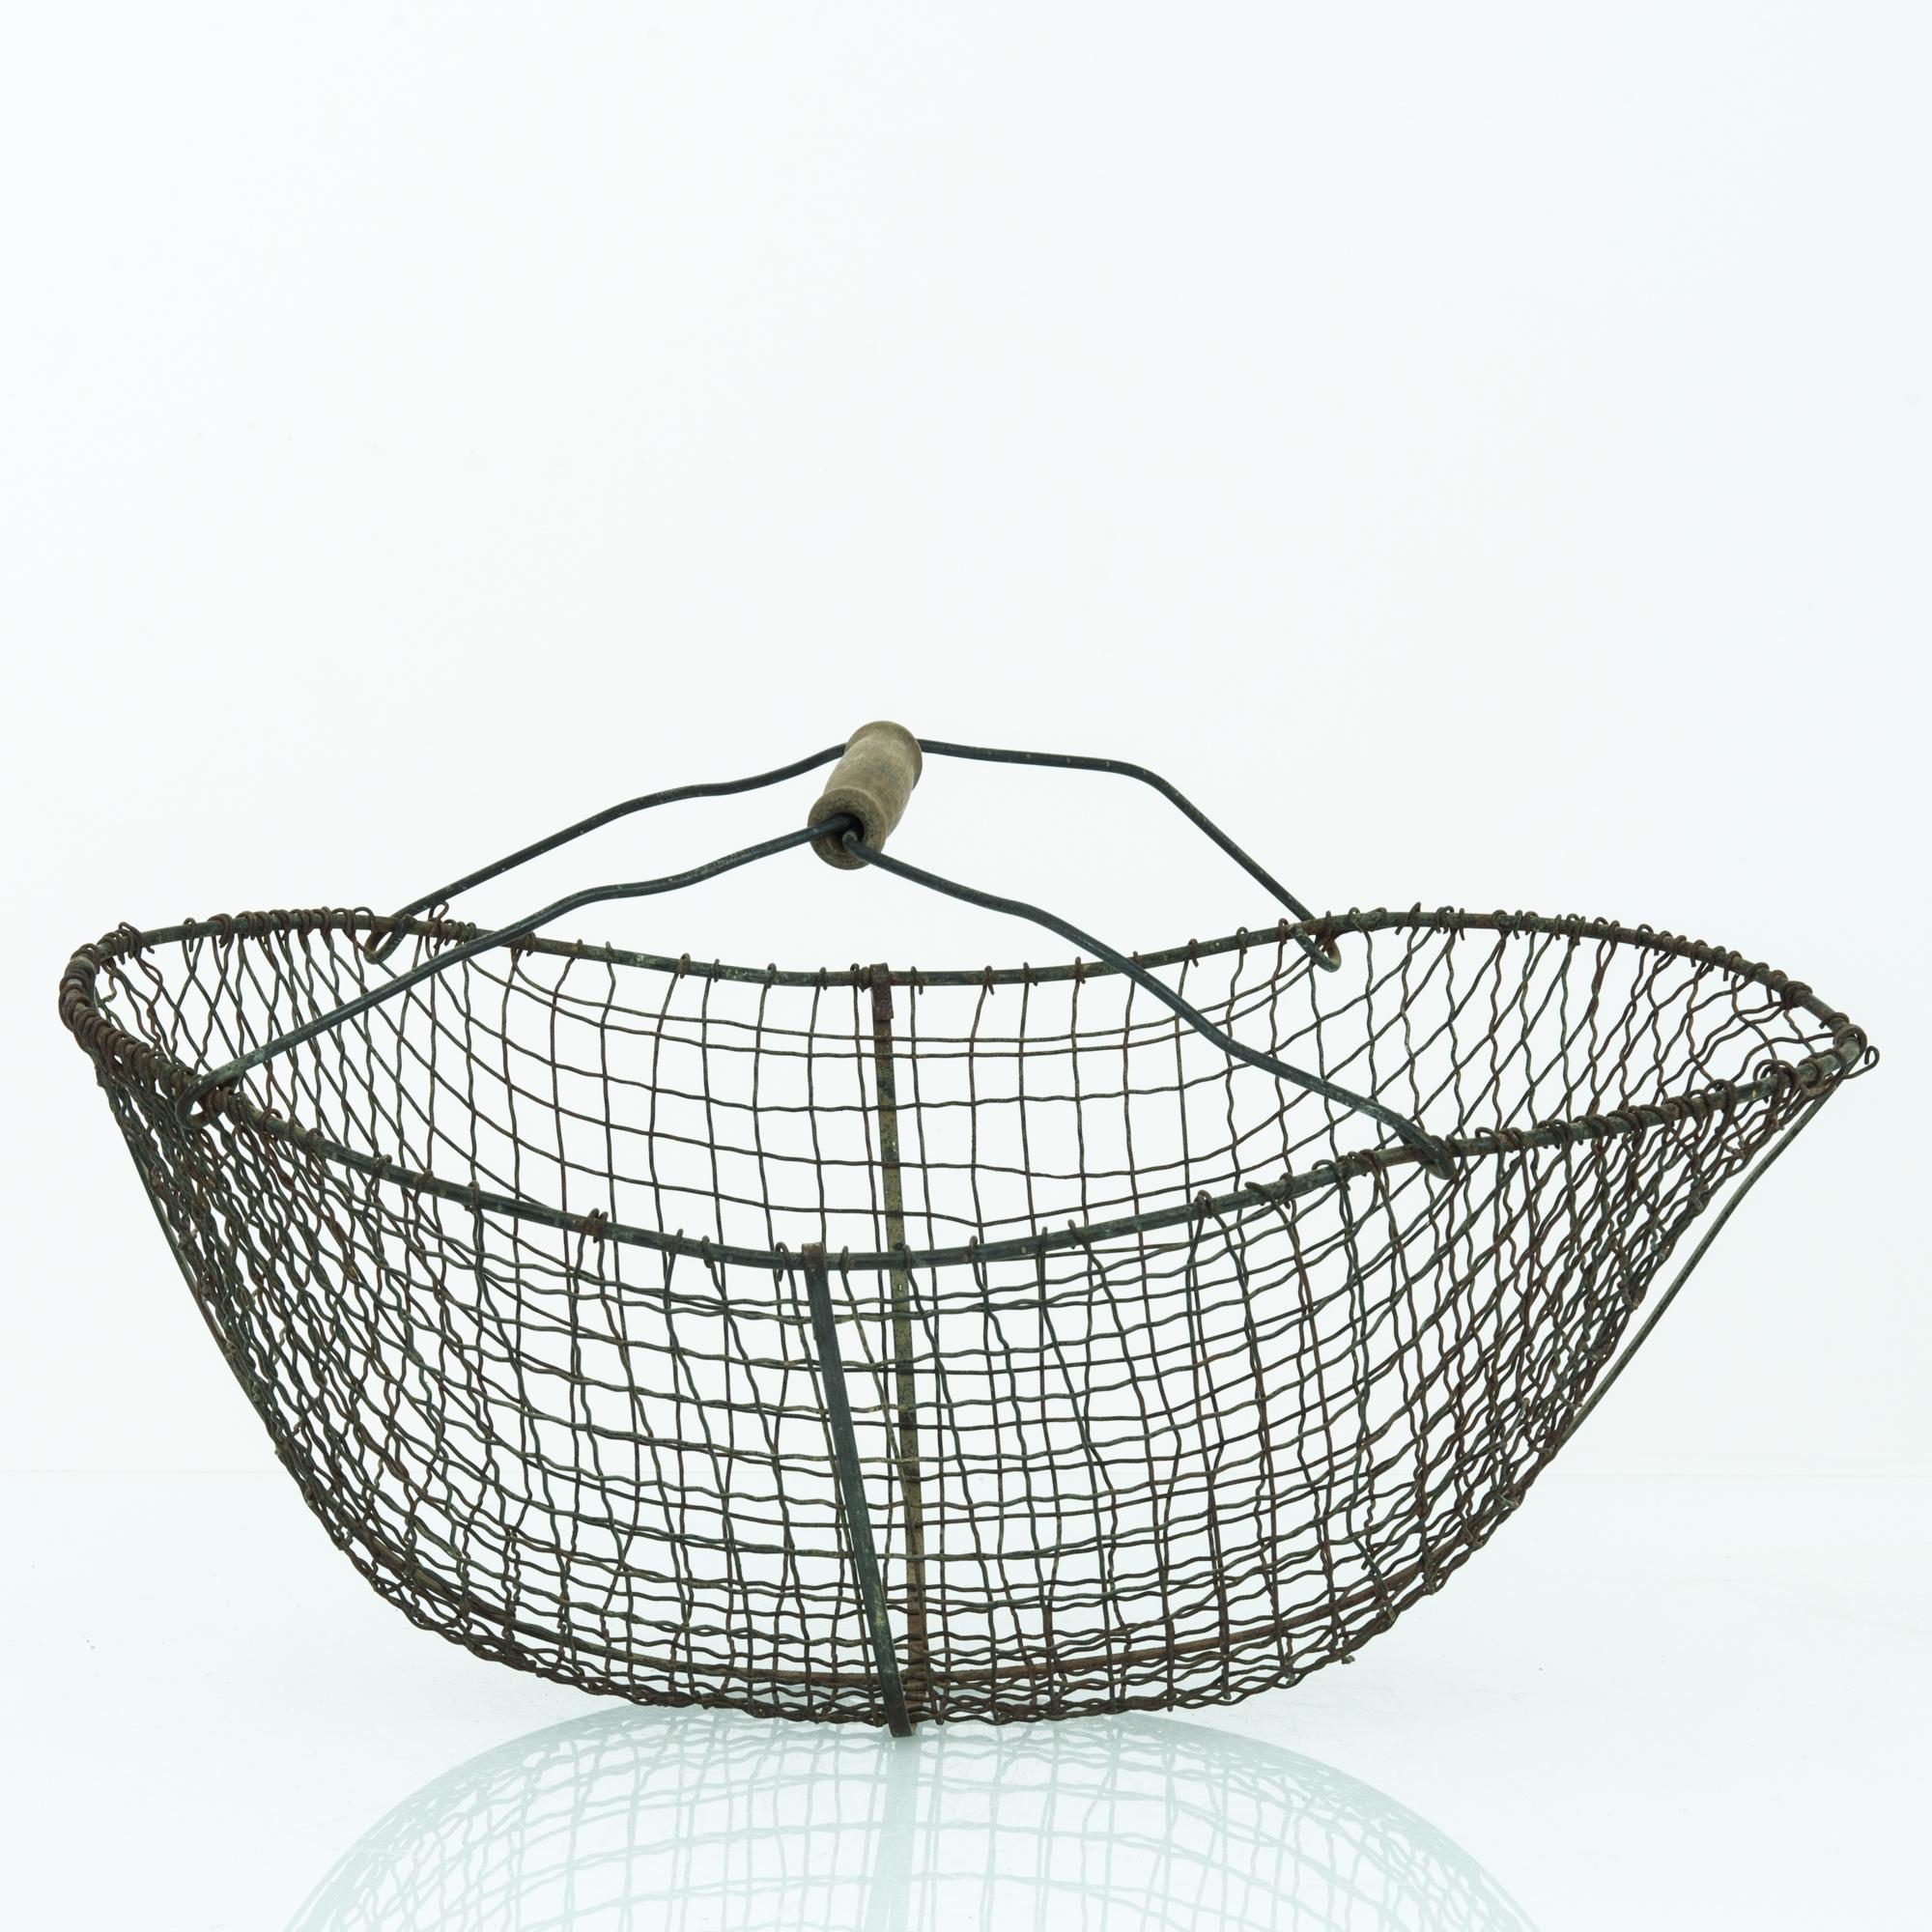 This basket was made in Belgium, circa 1960. Woven from thin metal wires, the basket displays a netted, organic structure with depth and a gentle flare. With a storied patina, this time-worn basket makes a charming cradle for future collections. A